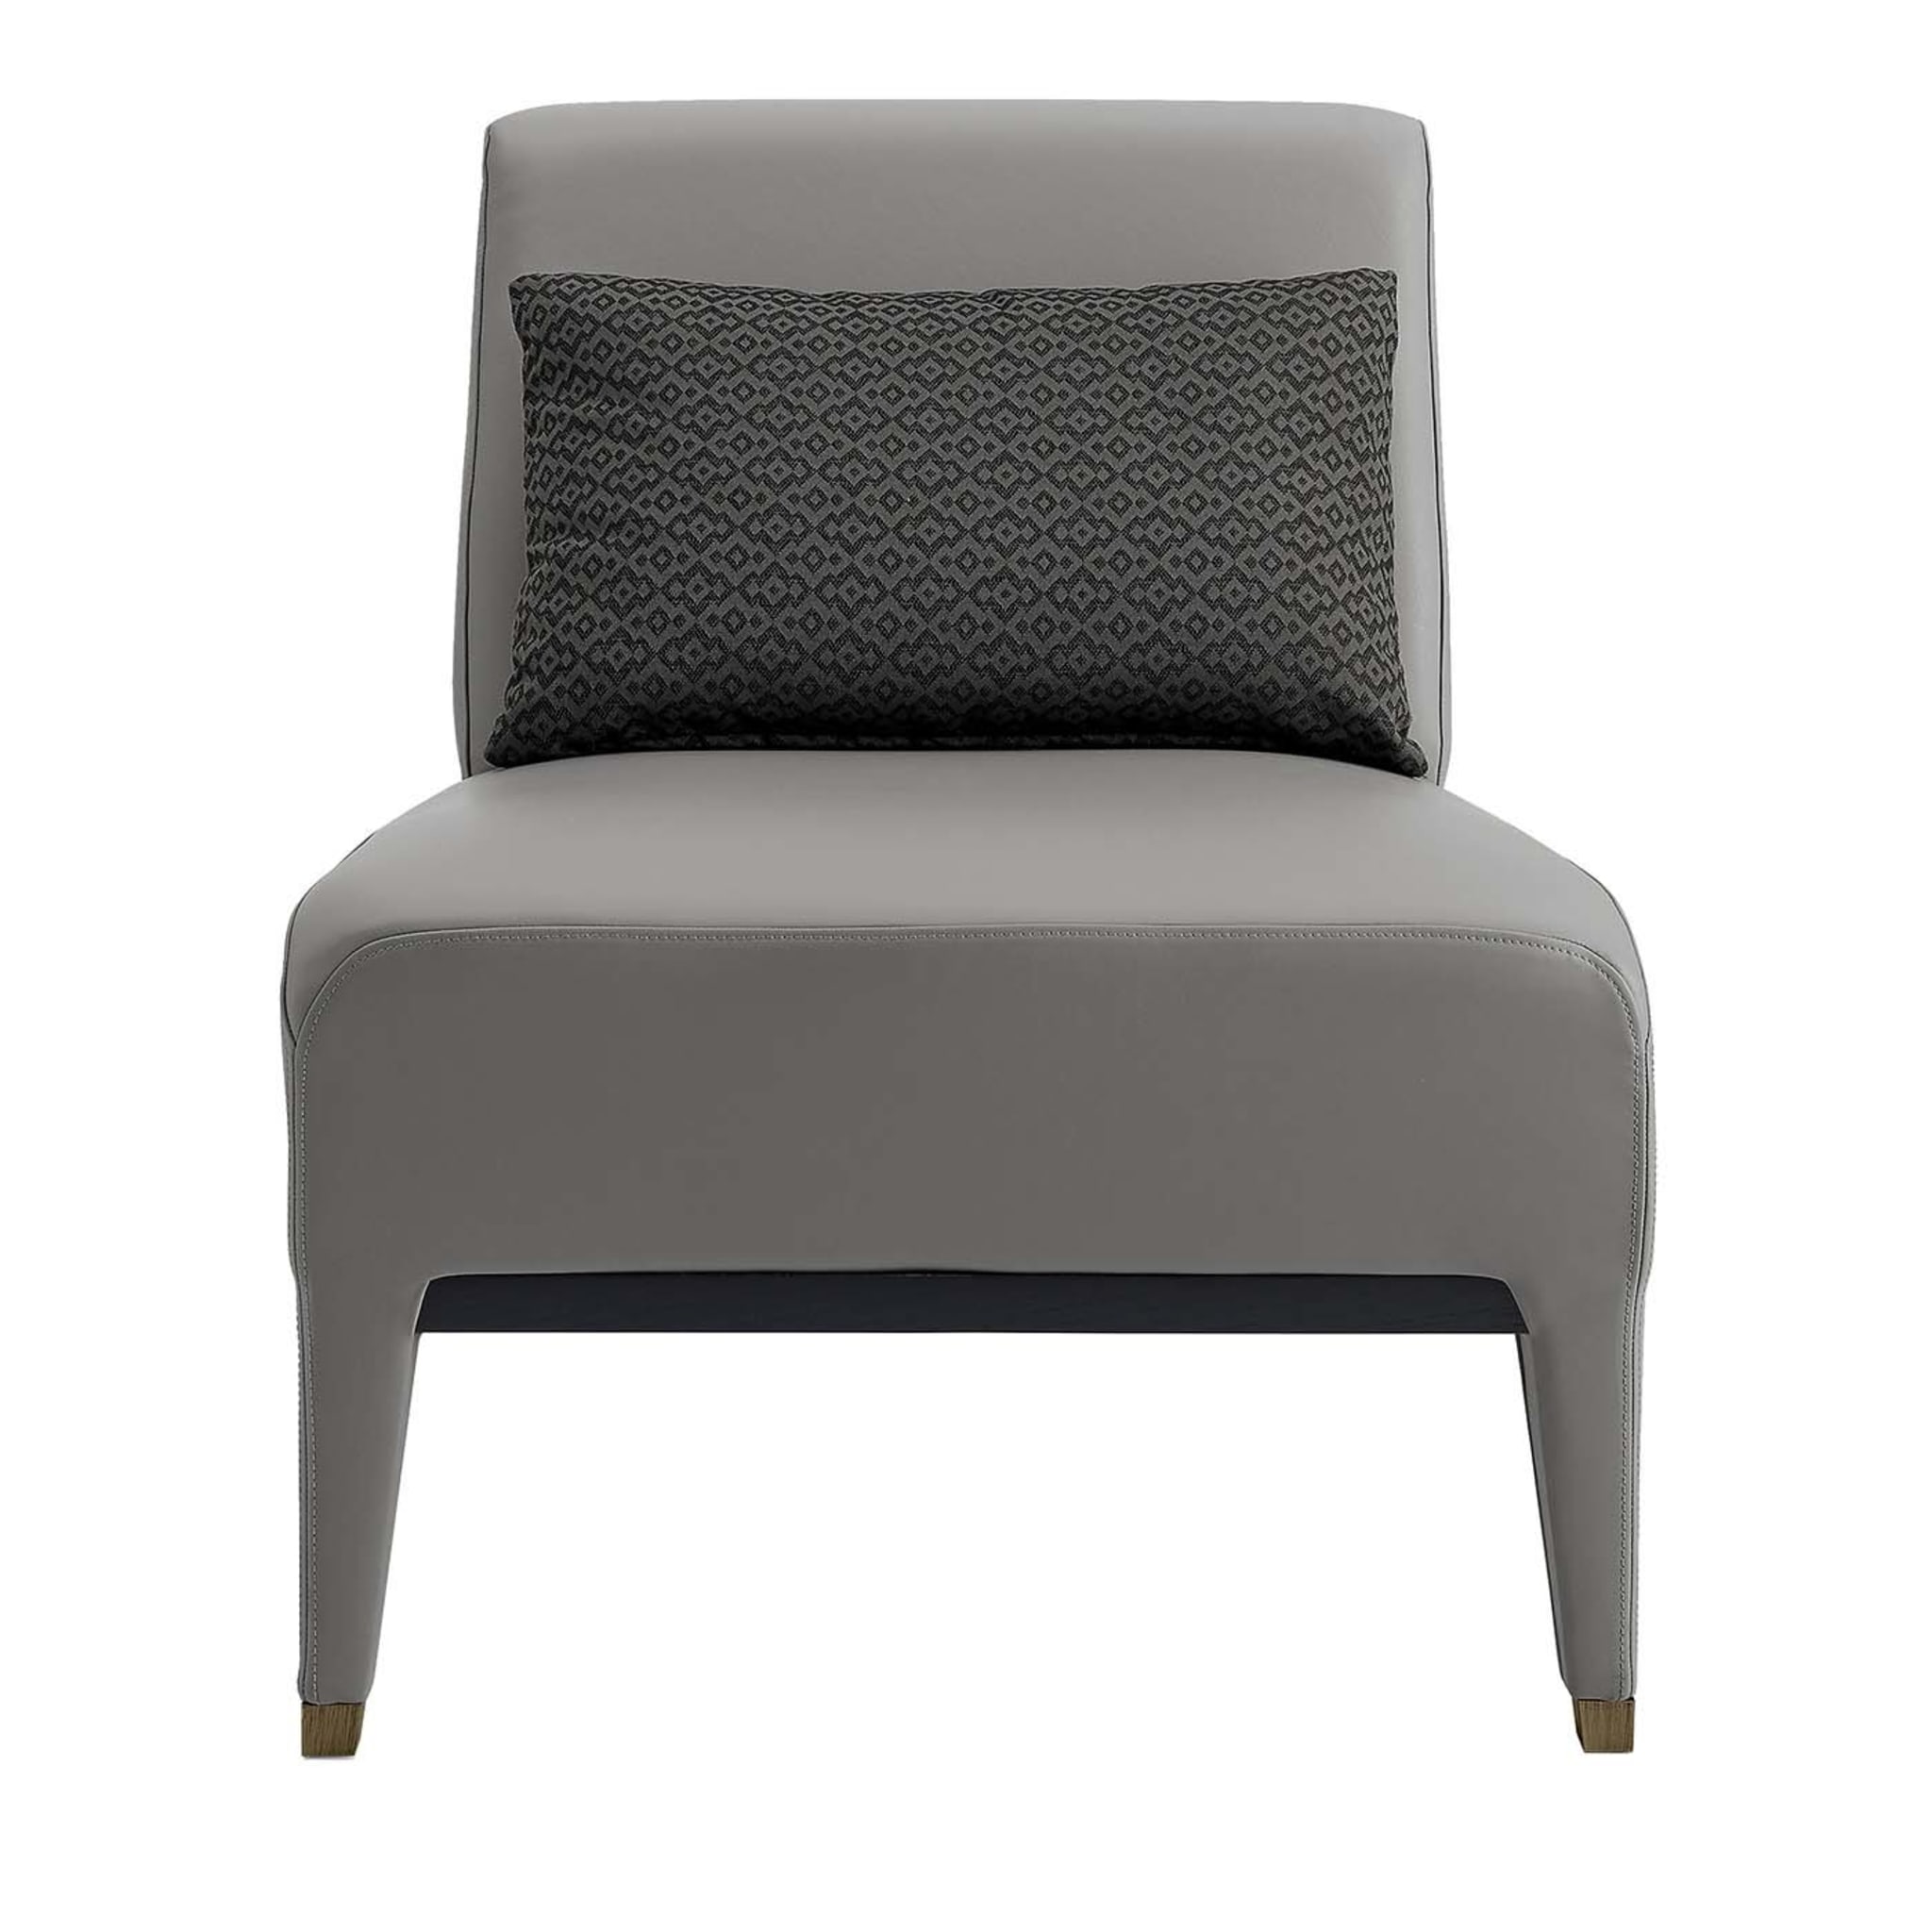 Gray Leather Armchair - Main view